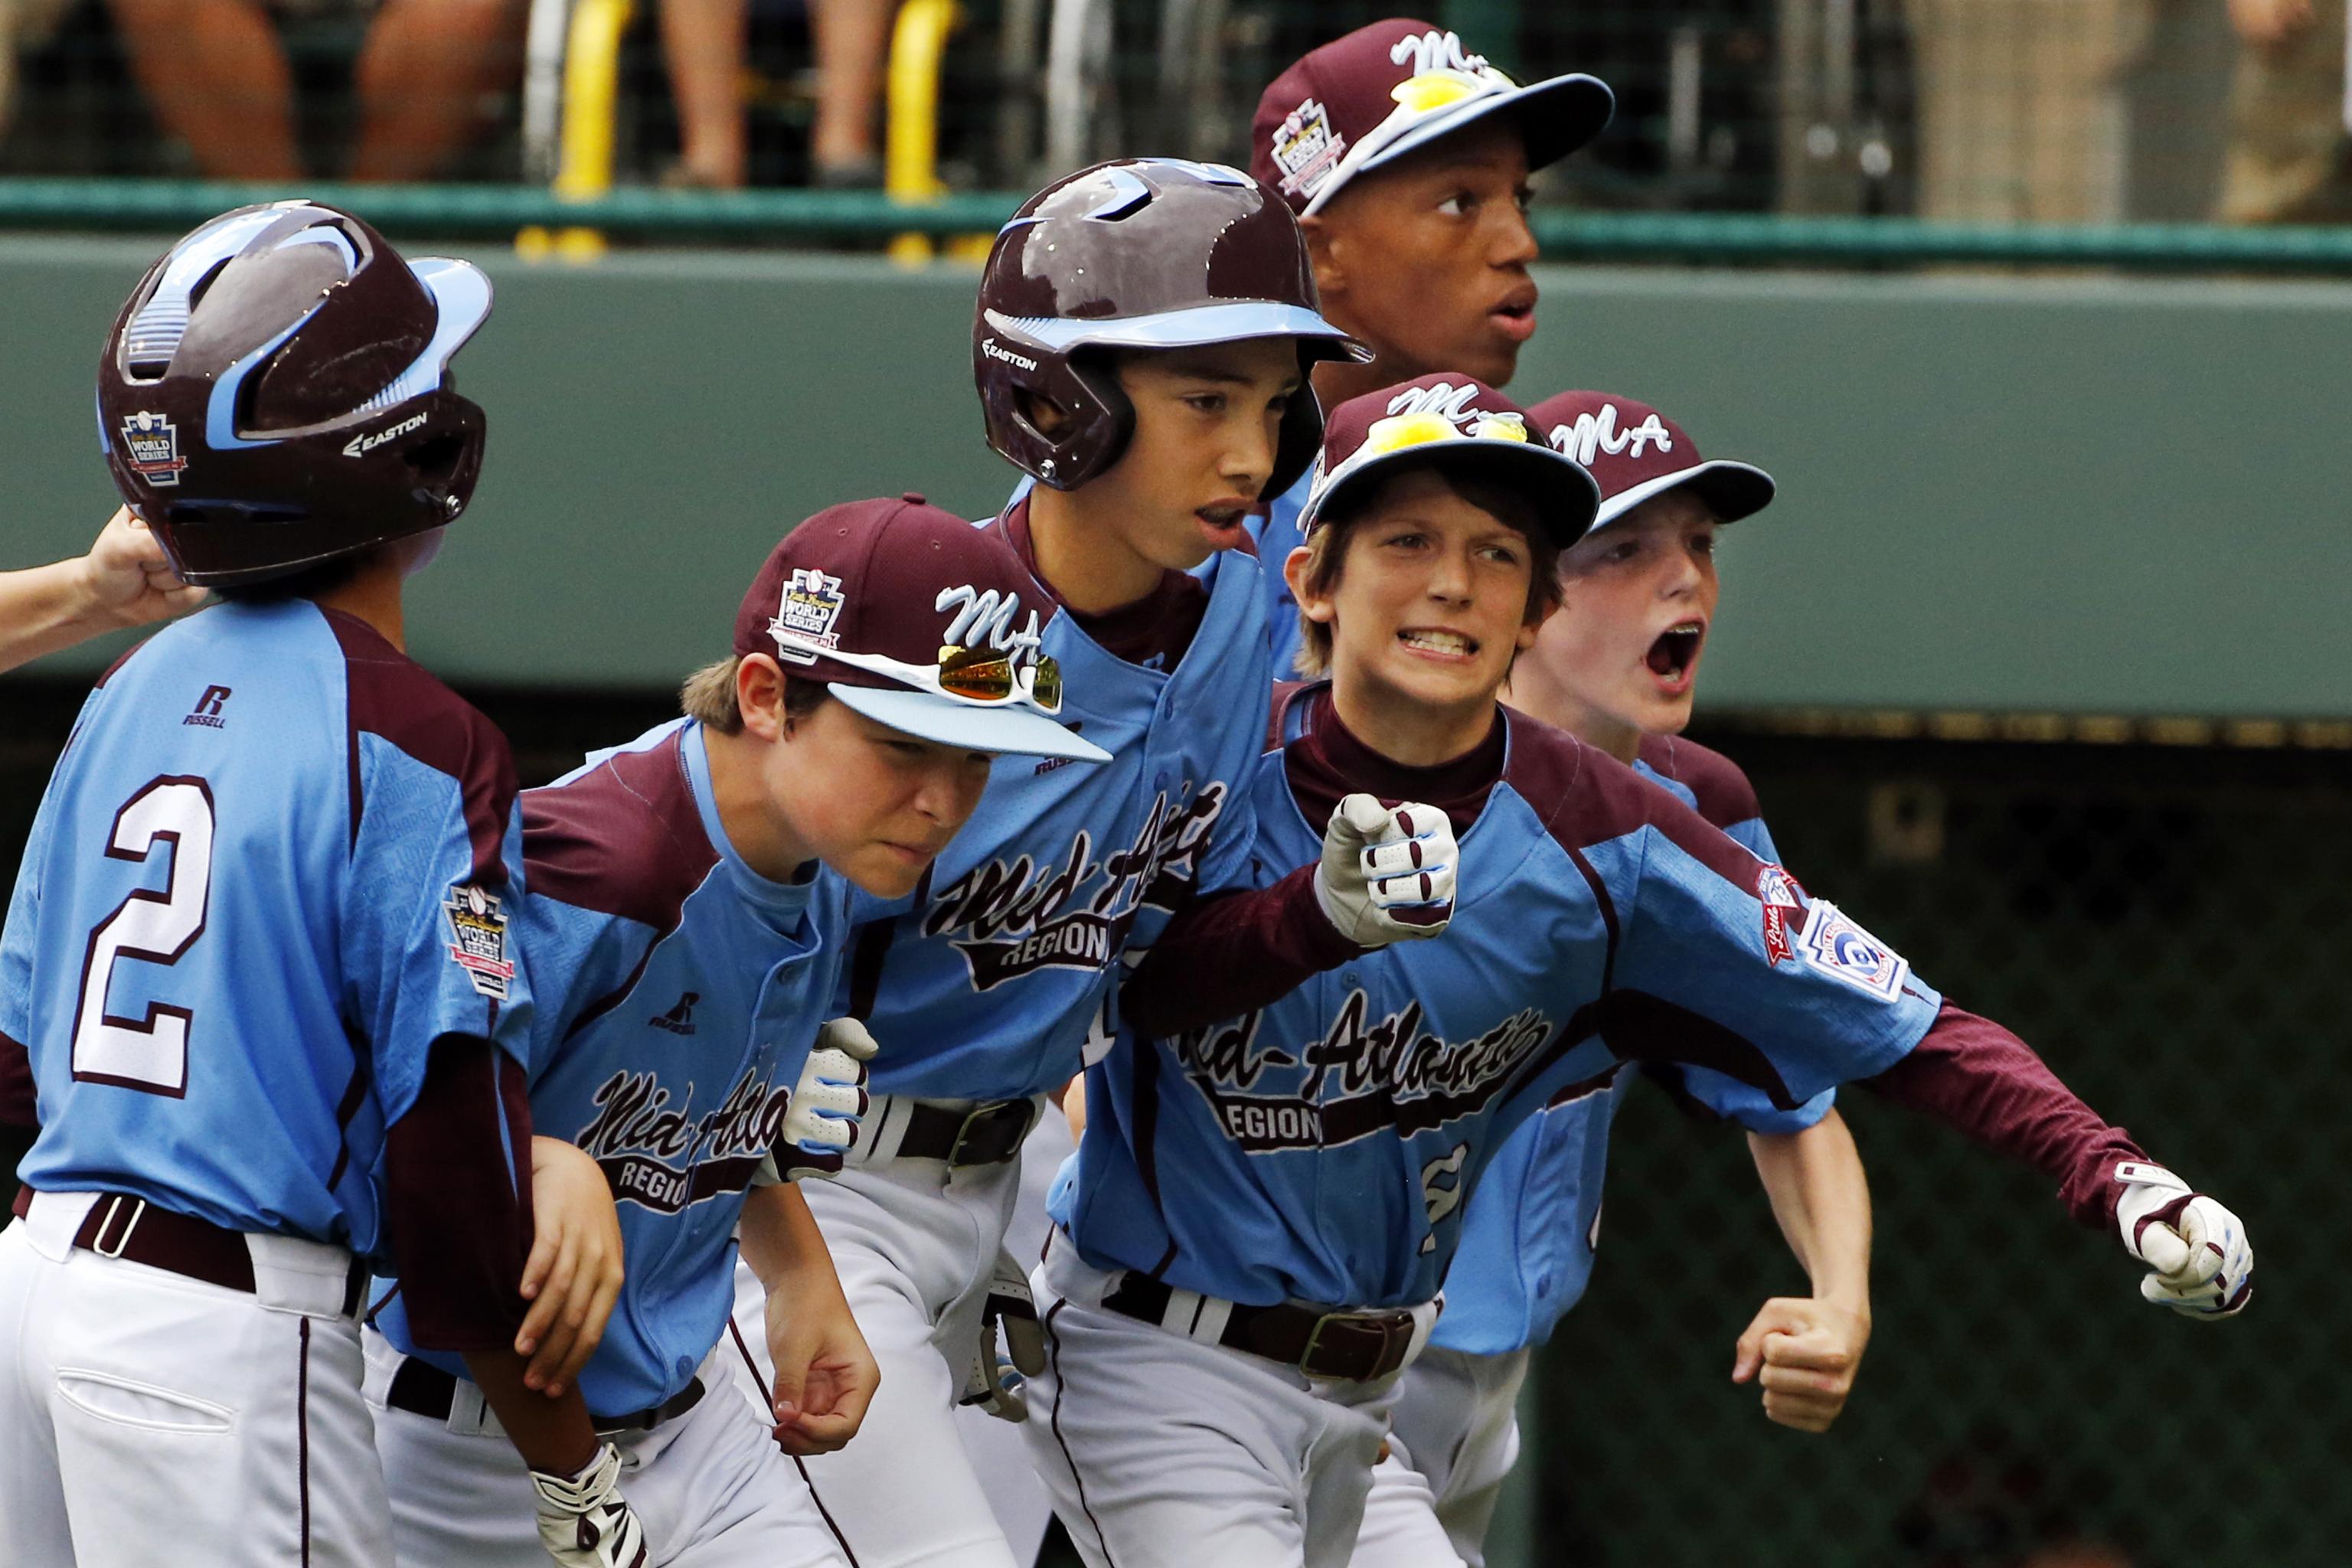 Pearland stays alive in Little League World Series with win over Iowa